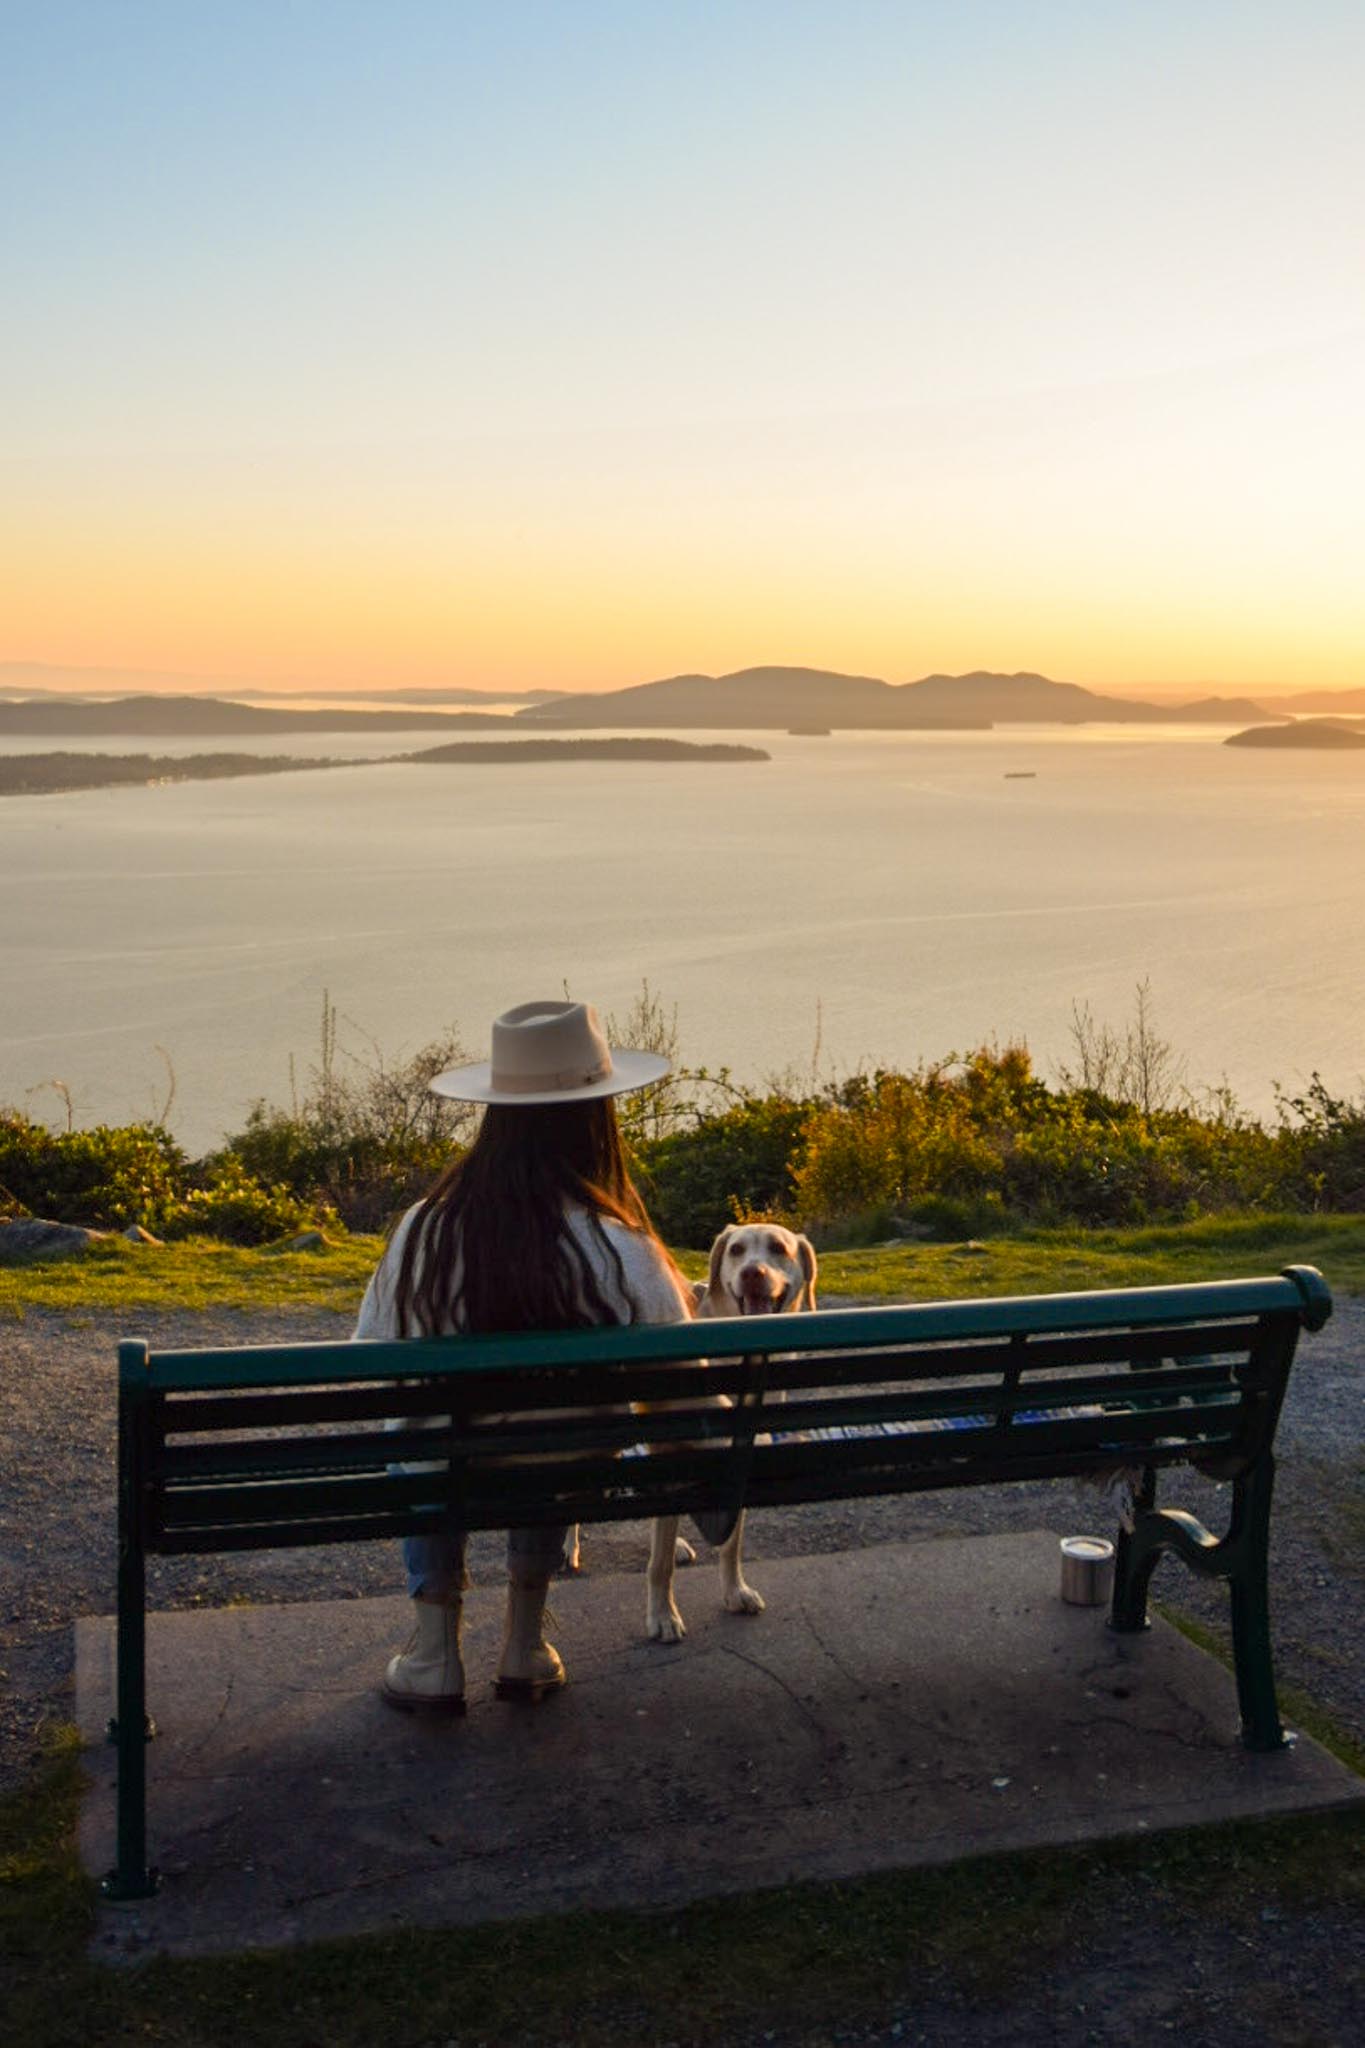 Sunset at Samish Overlook is at the top of my list of Things to do in Bellingham Washington